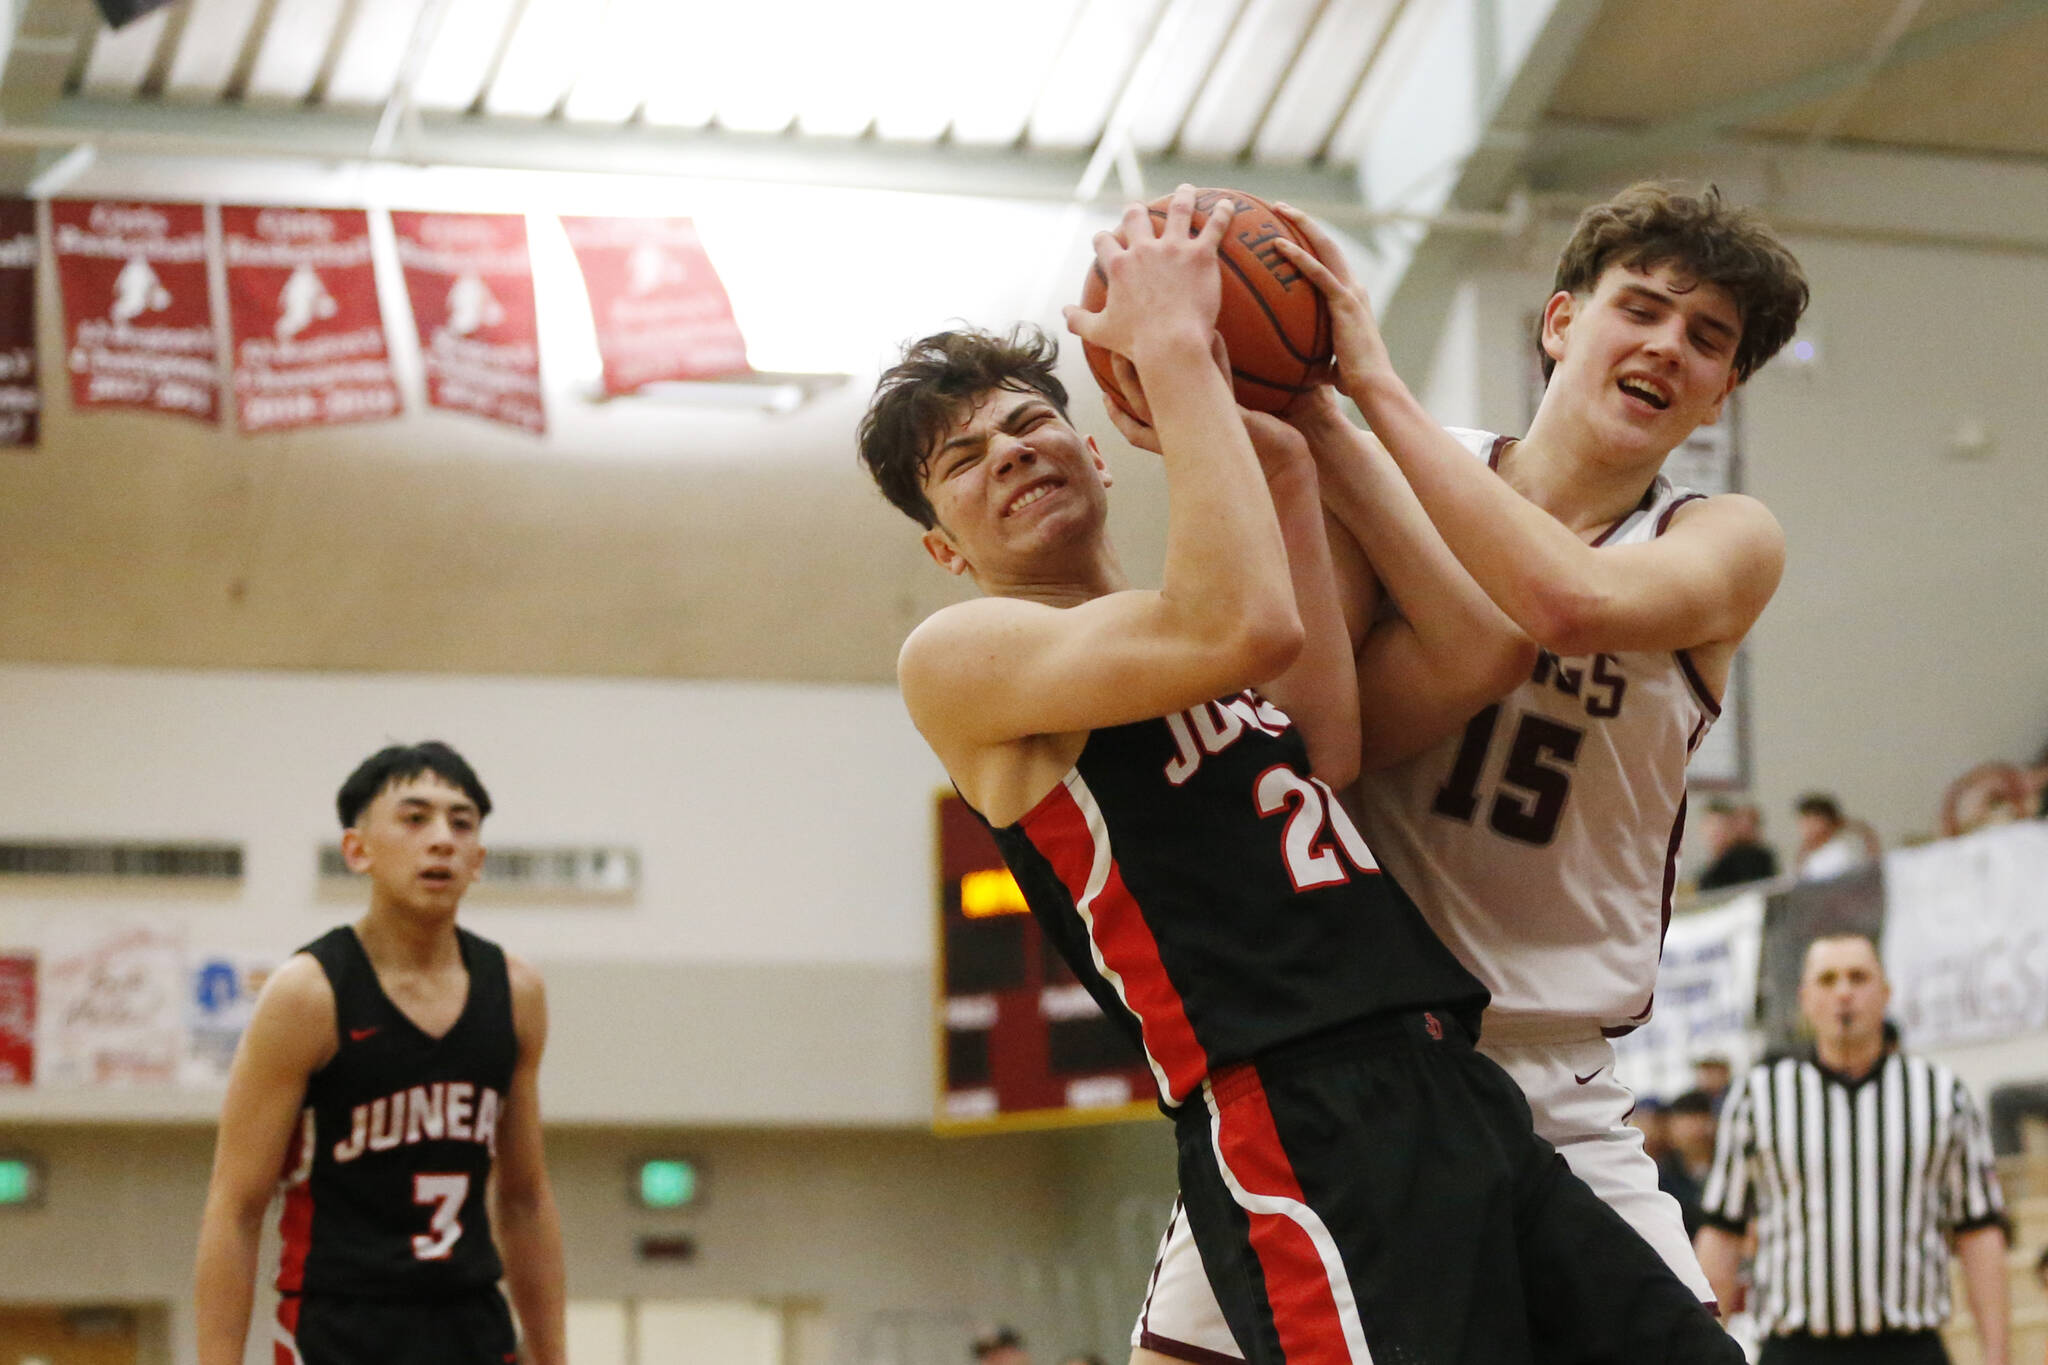 Juneau's Orion Dybdahl (20) forces a jump ball with Kayhi's Jared Rhoads (15) during Juneau's 71-52 loss to Kayhi on Friday at the Clarke Cochrane Gymnasium. (Christopher Mullen / Ketchikan Daily News)